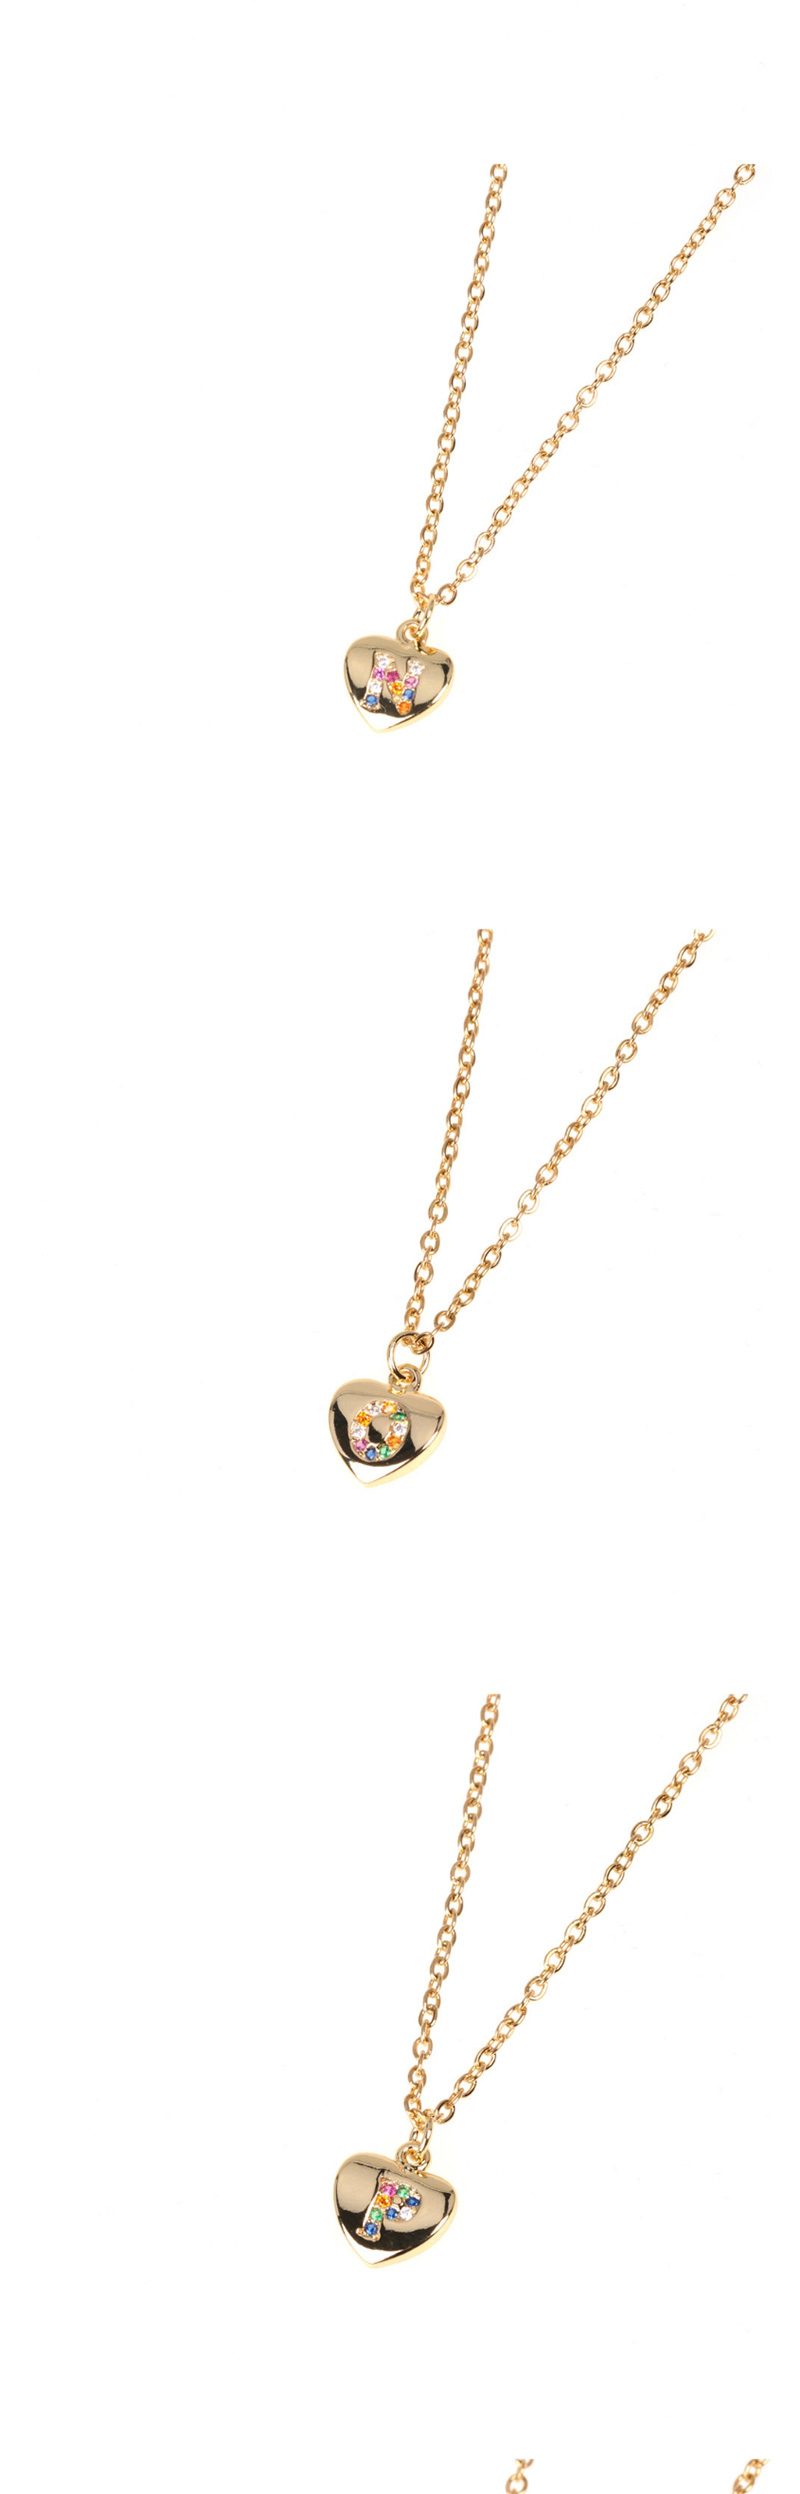 Fashion Golden Love Letter Necklace With Alloy Diamonds,Necklaces